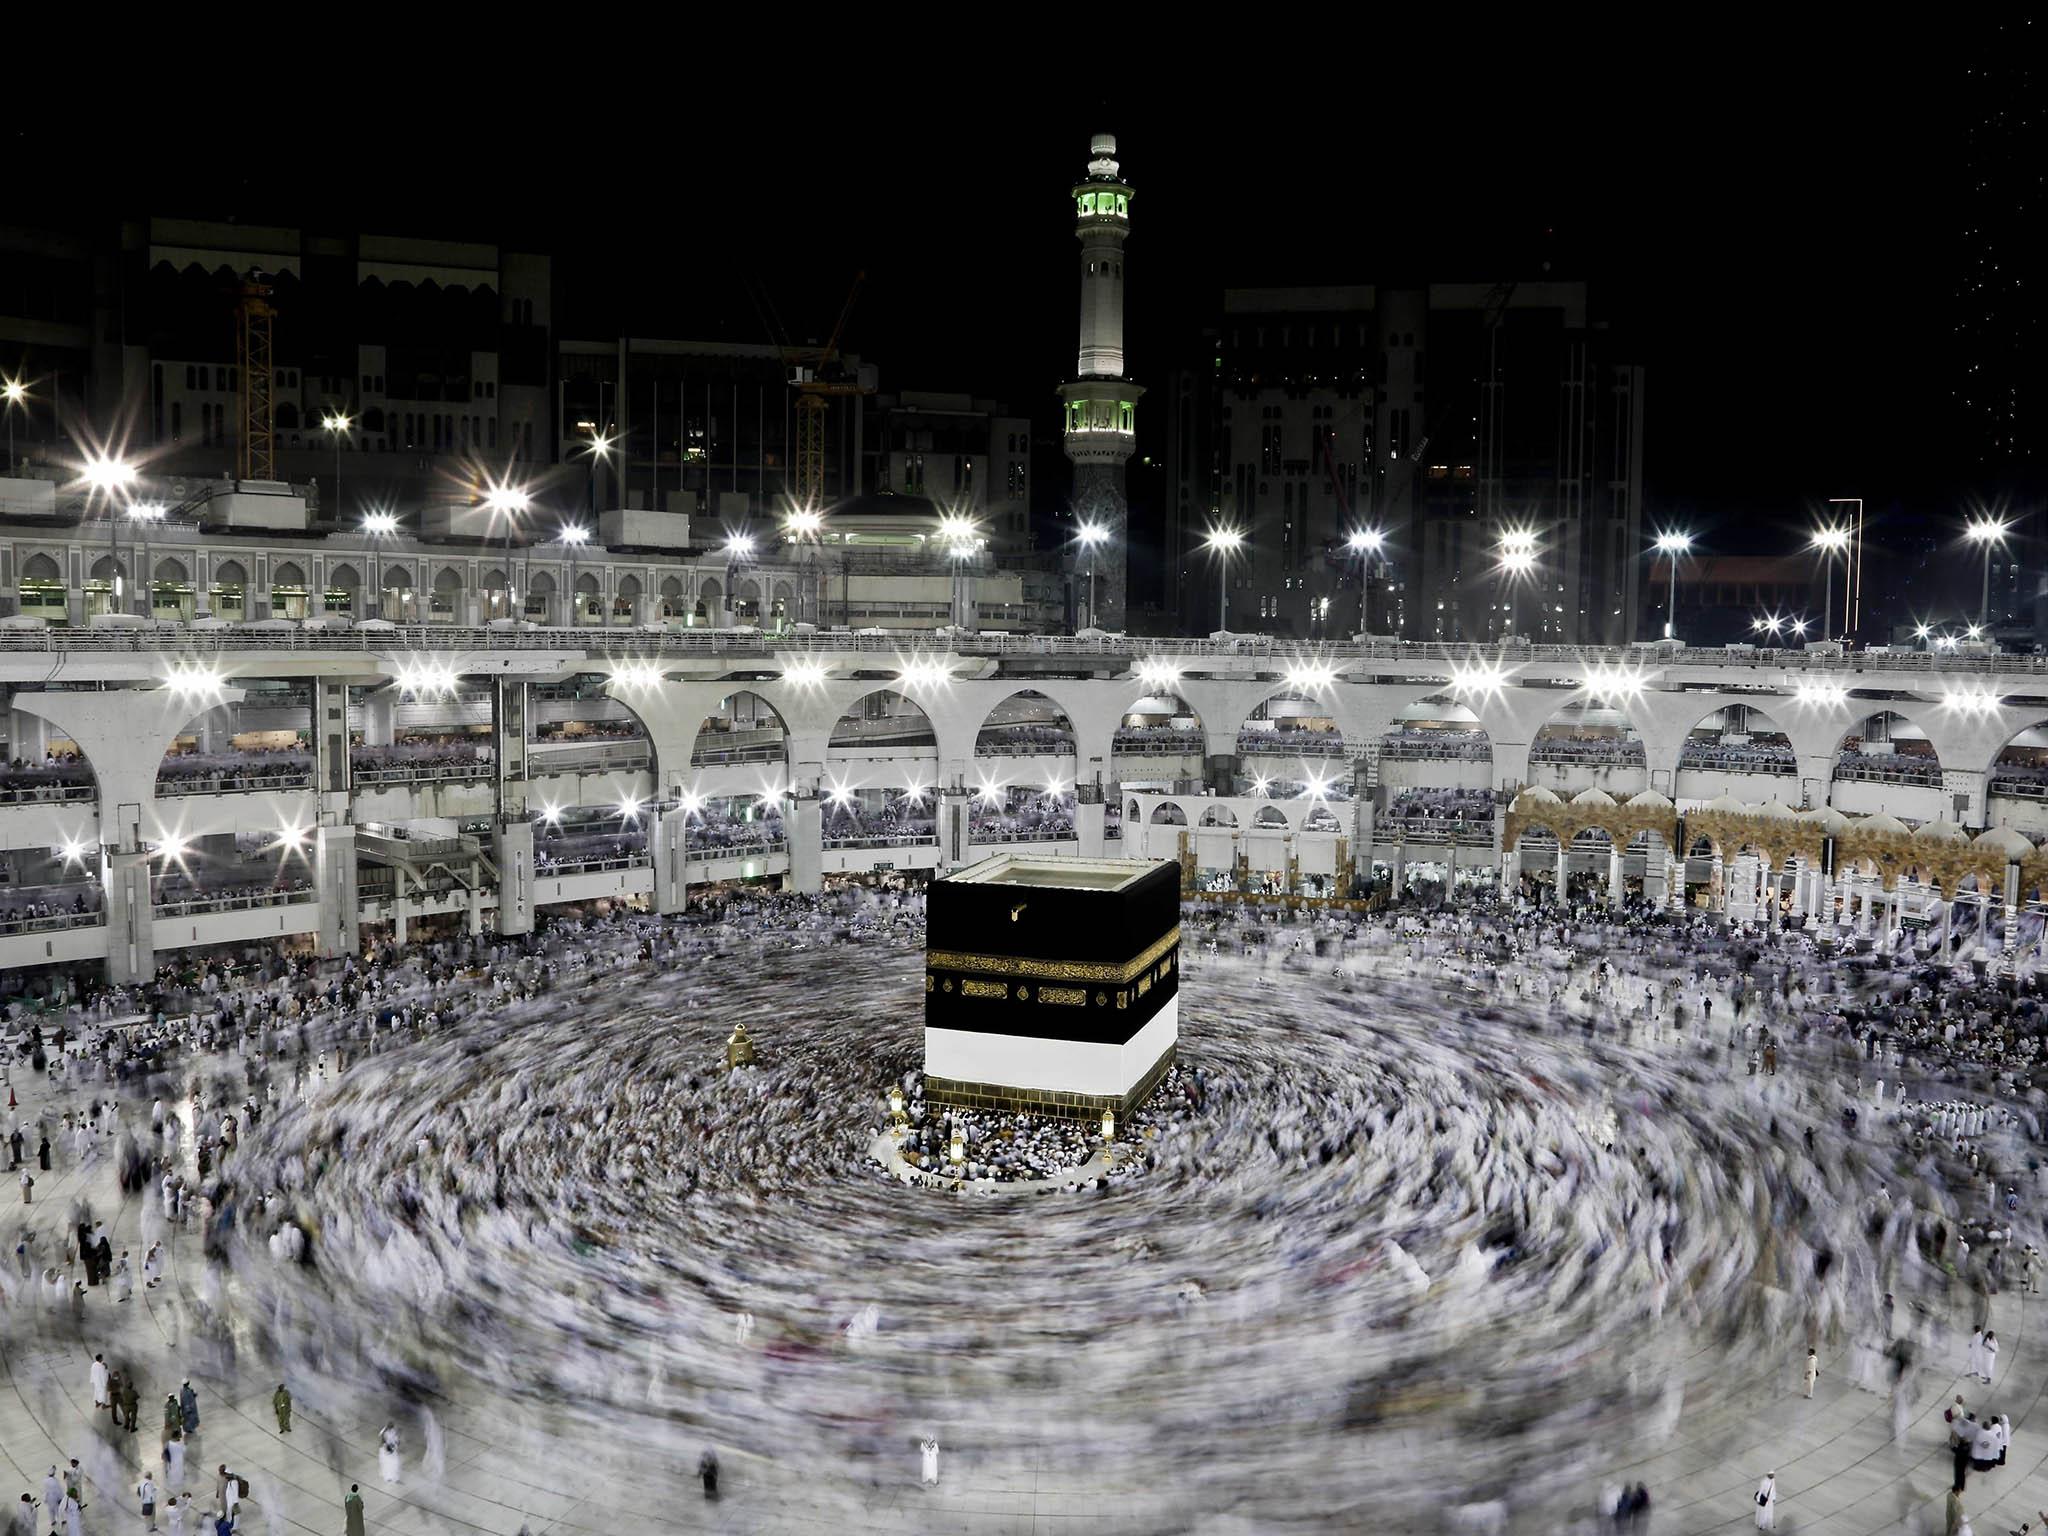 Mecca is the holiest site in the world for Muslims. Every year Muslims make the pilgrimage to the holy city of Mecca and circle the shrine, known as the Kaaba, seven times and then touch it